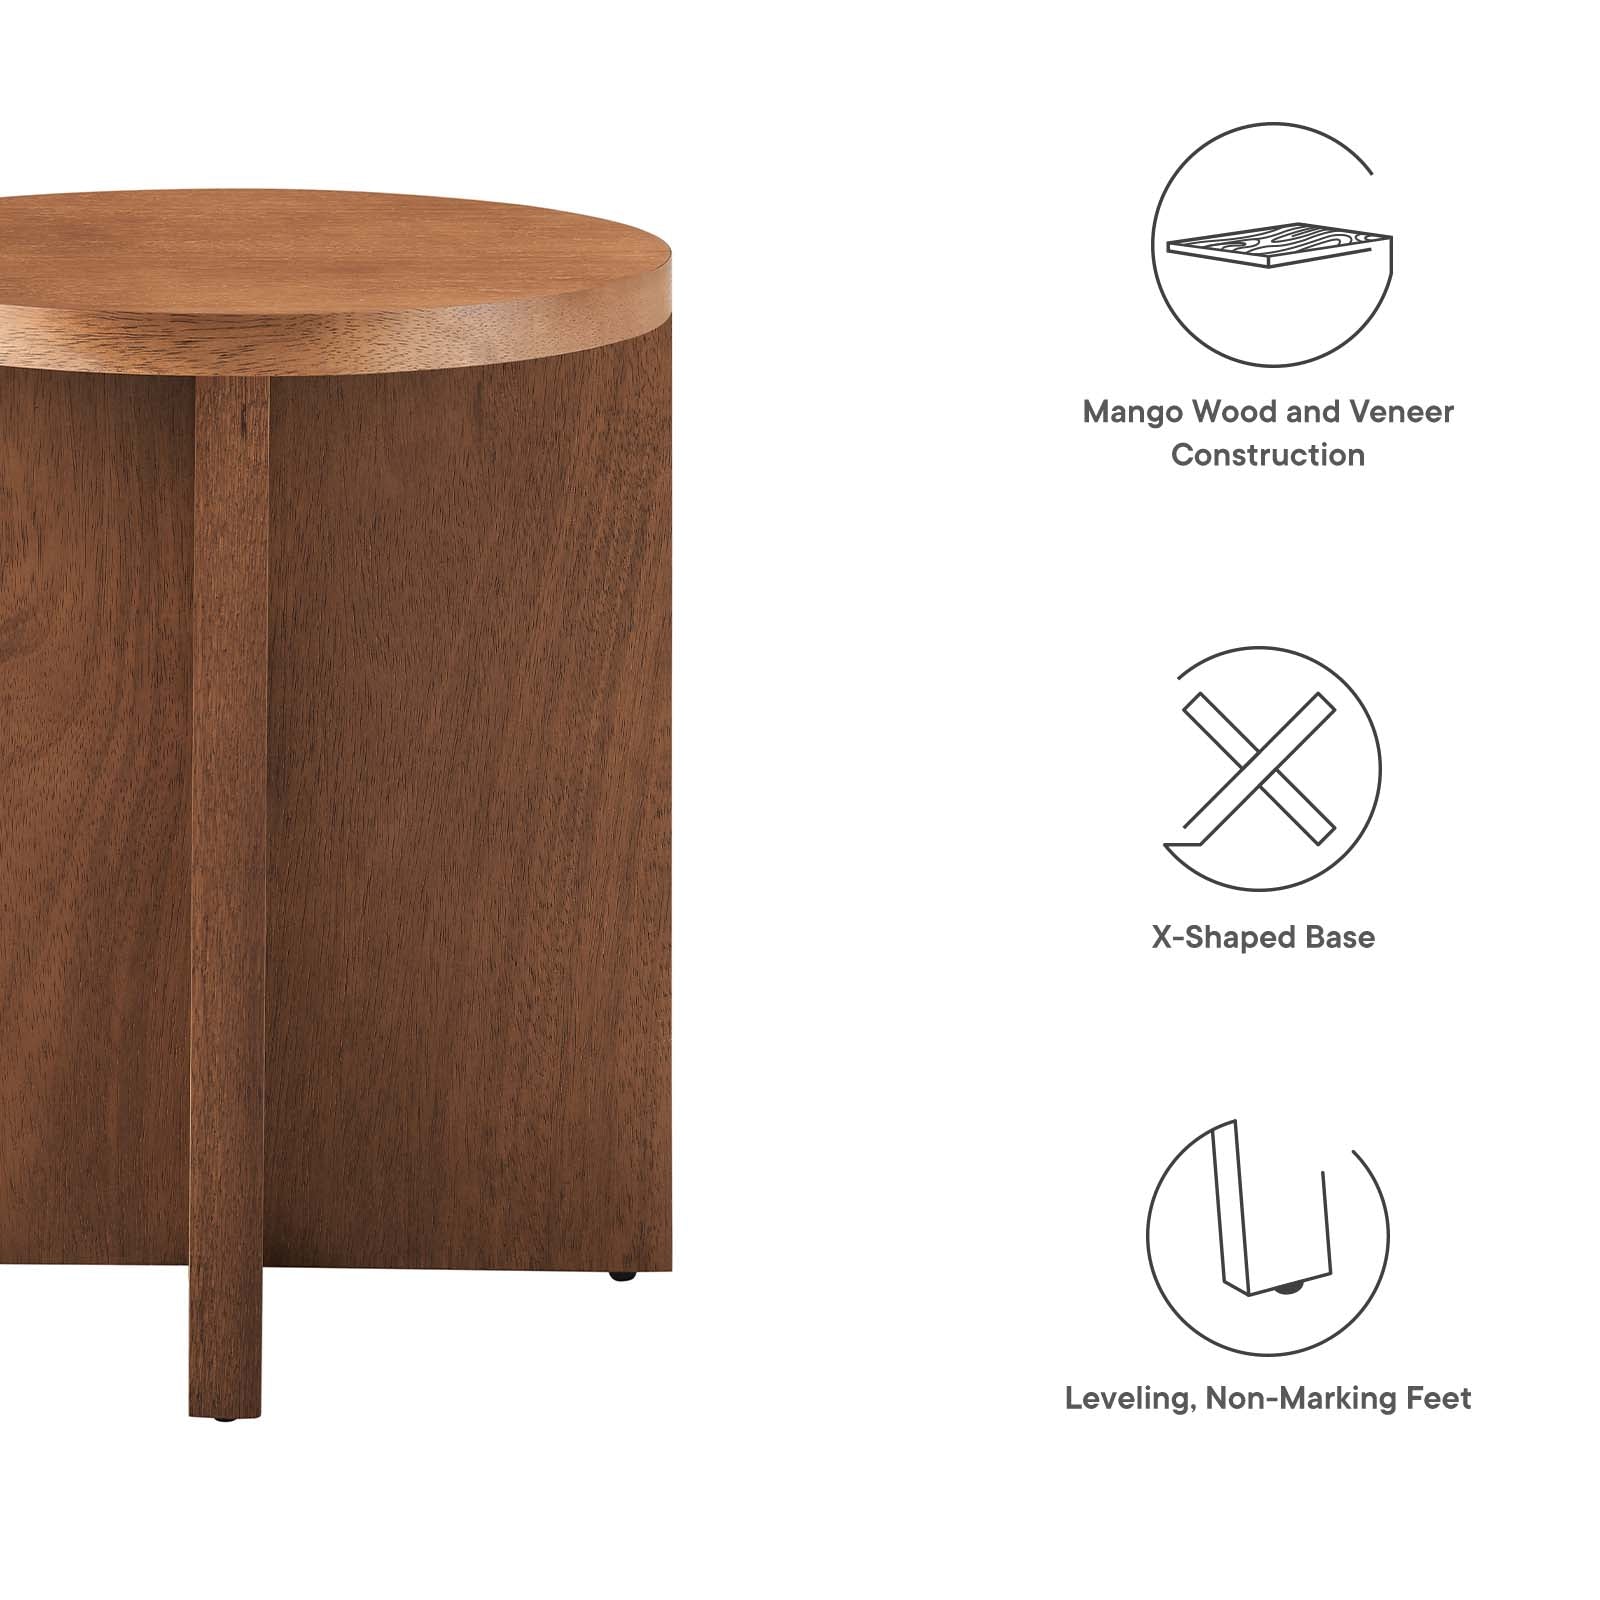 Silas Round Wood Side Table